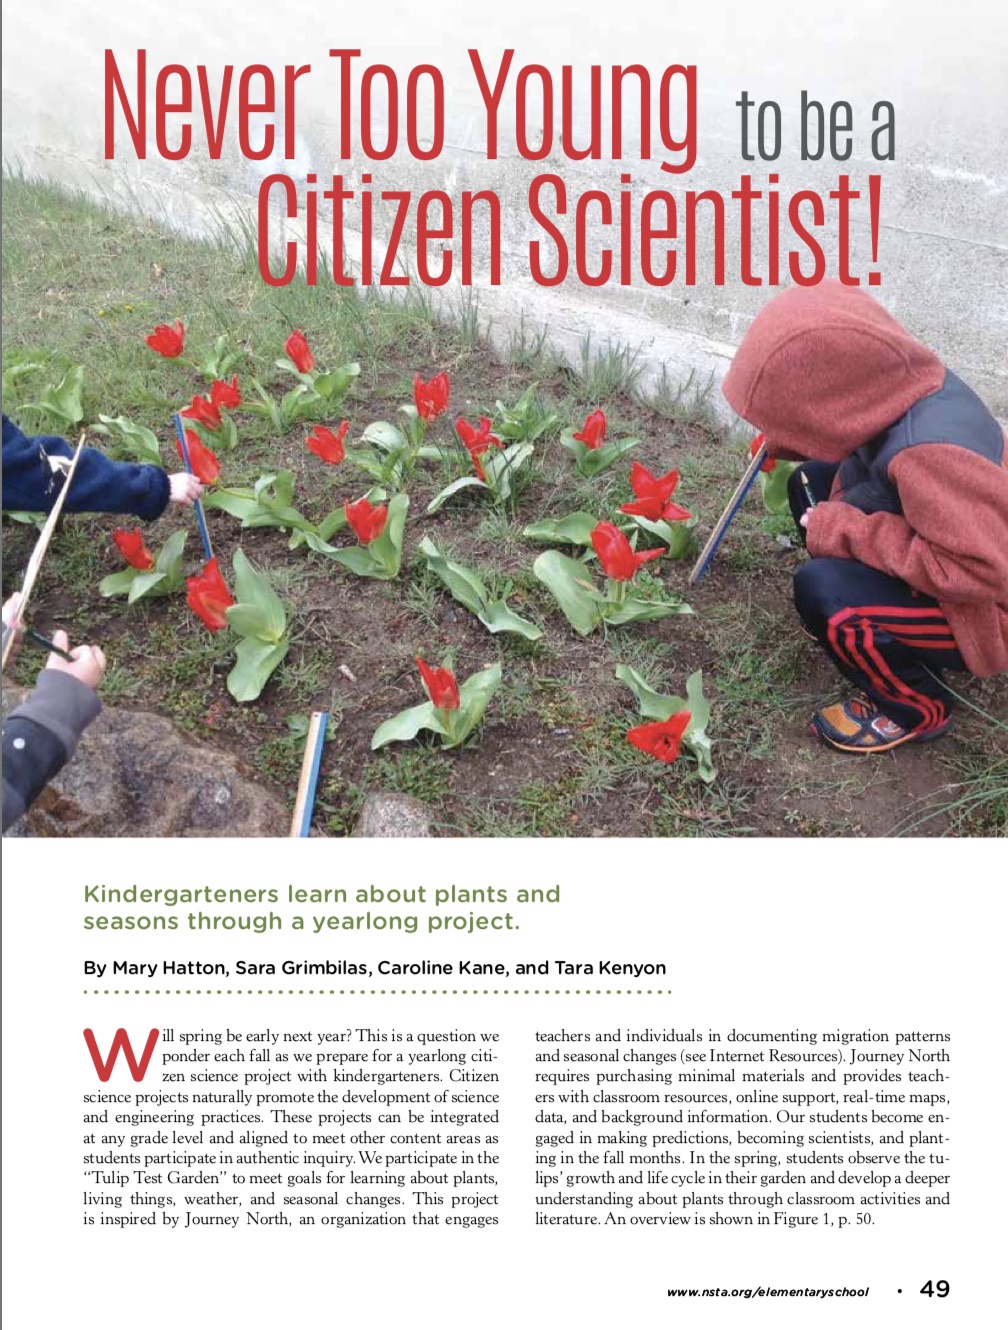 First page of article "Never Too Young to be a Citizen Scientist